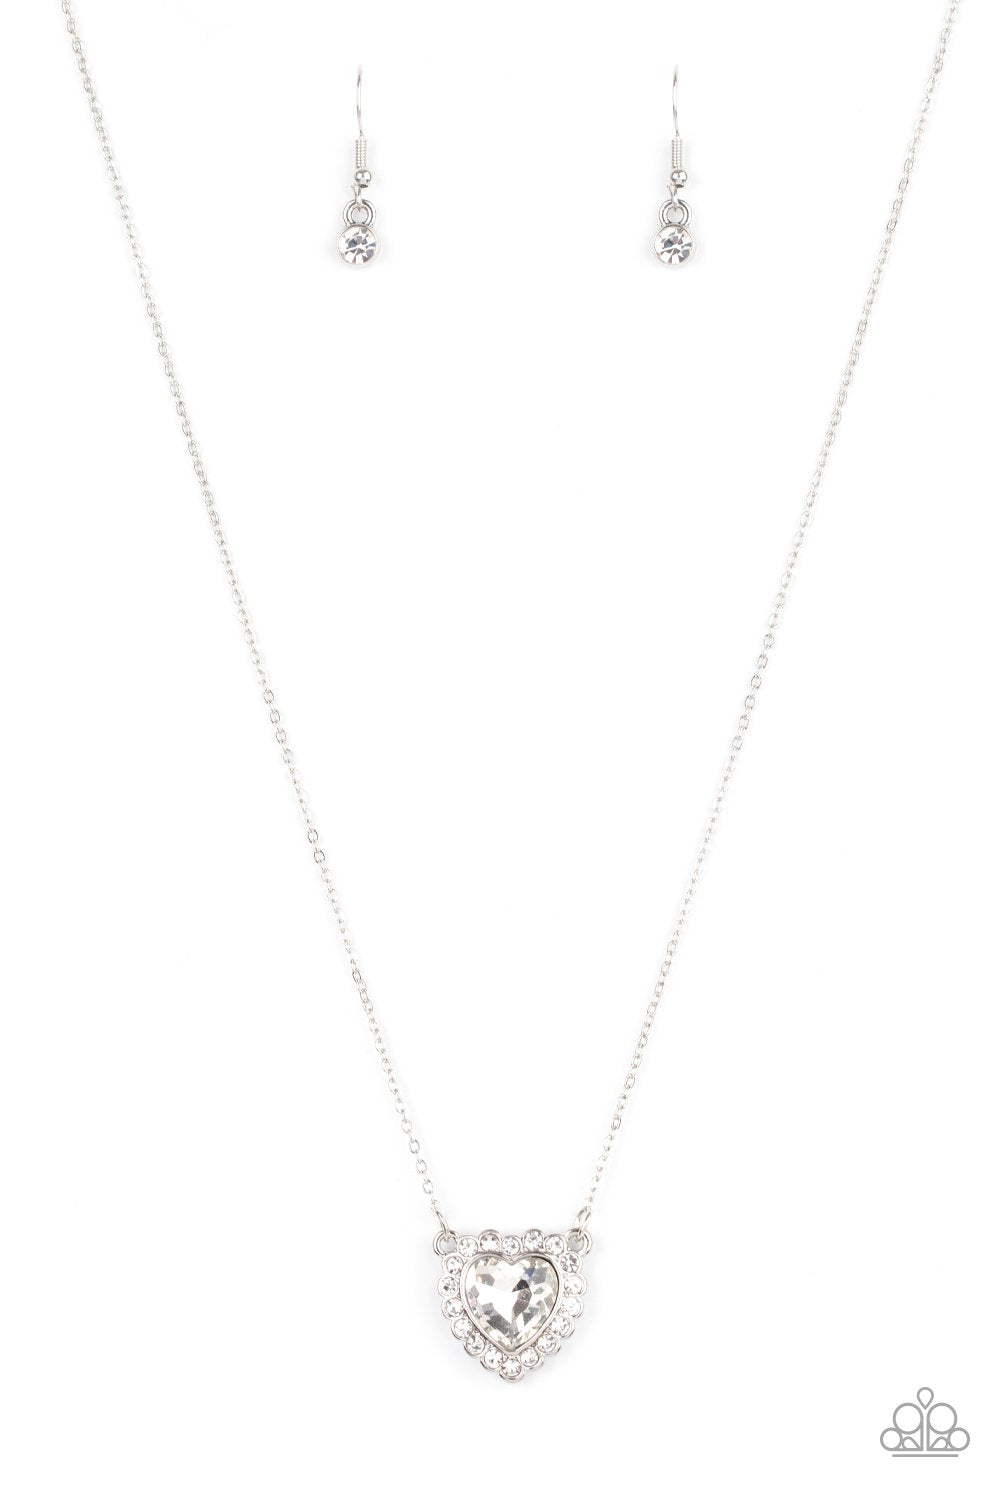 Out of the GLITTERY-ness of Your Heart - White - Paparazzi Necklace